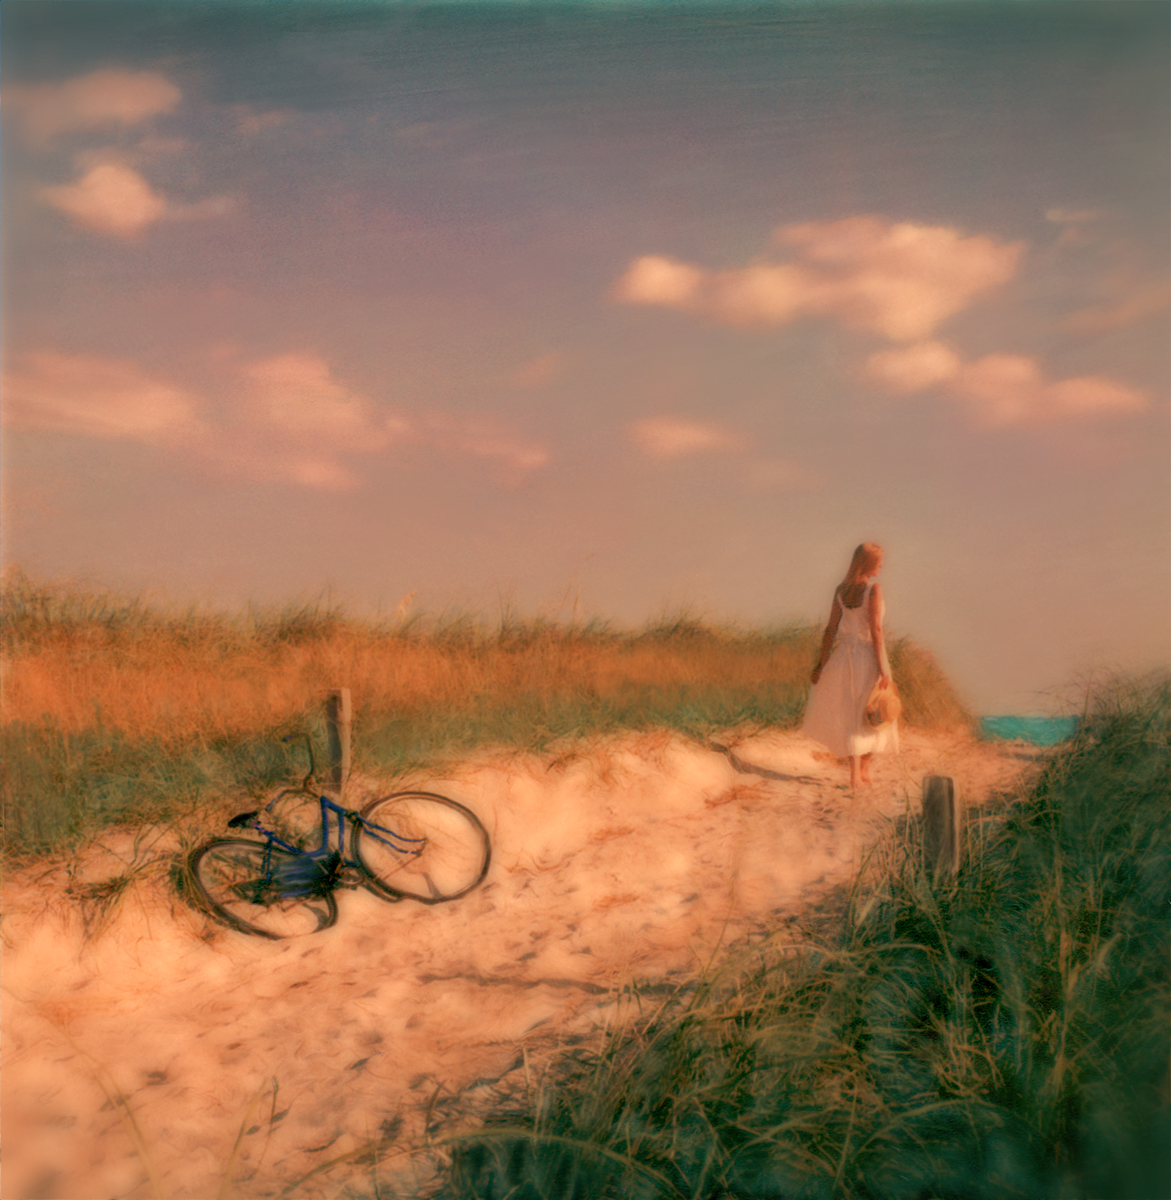 "Woman and Bicycle on Dune" <br> Miami Beach, FL